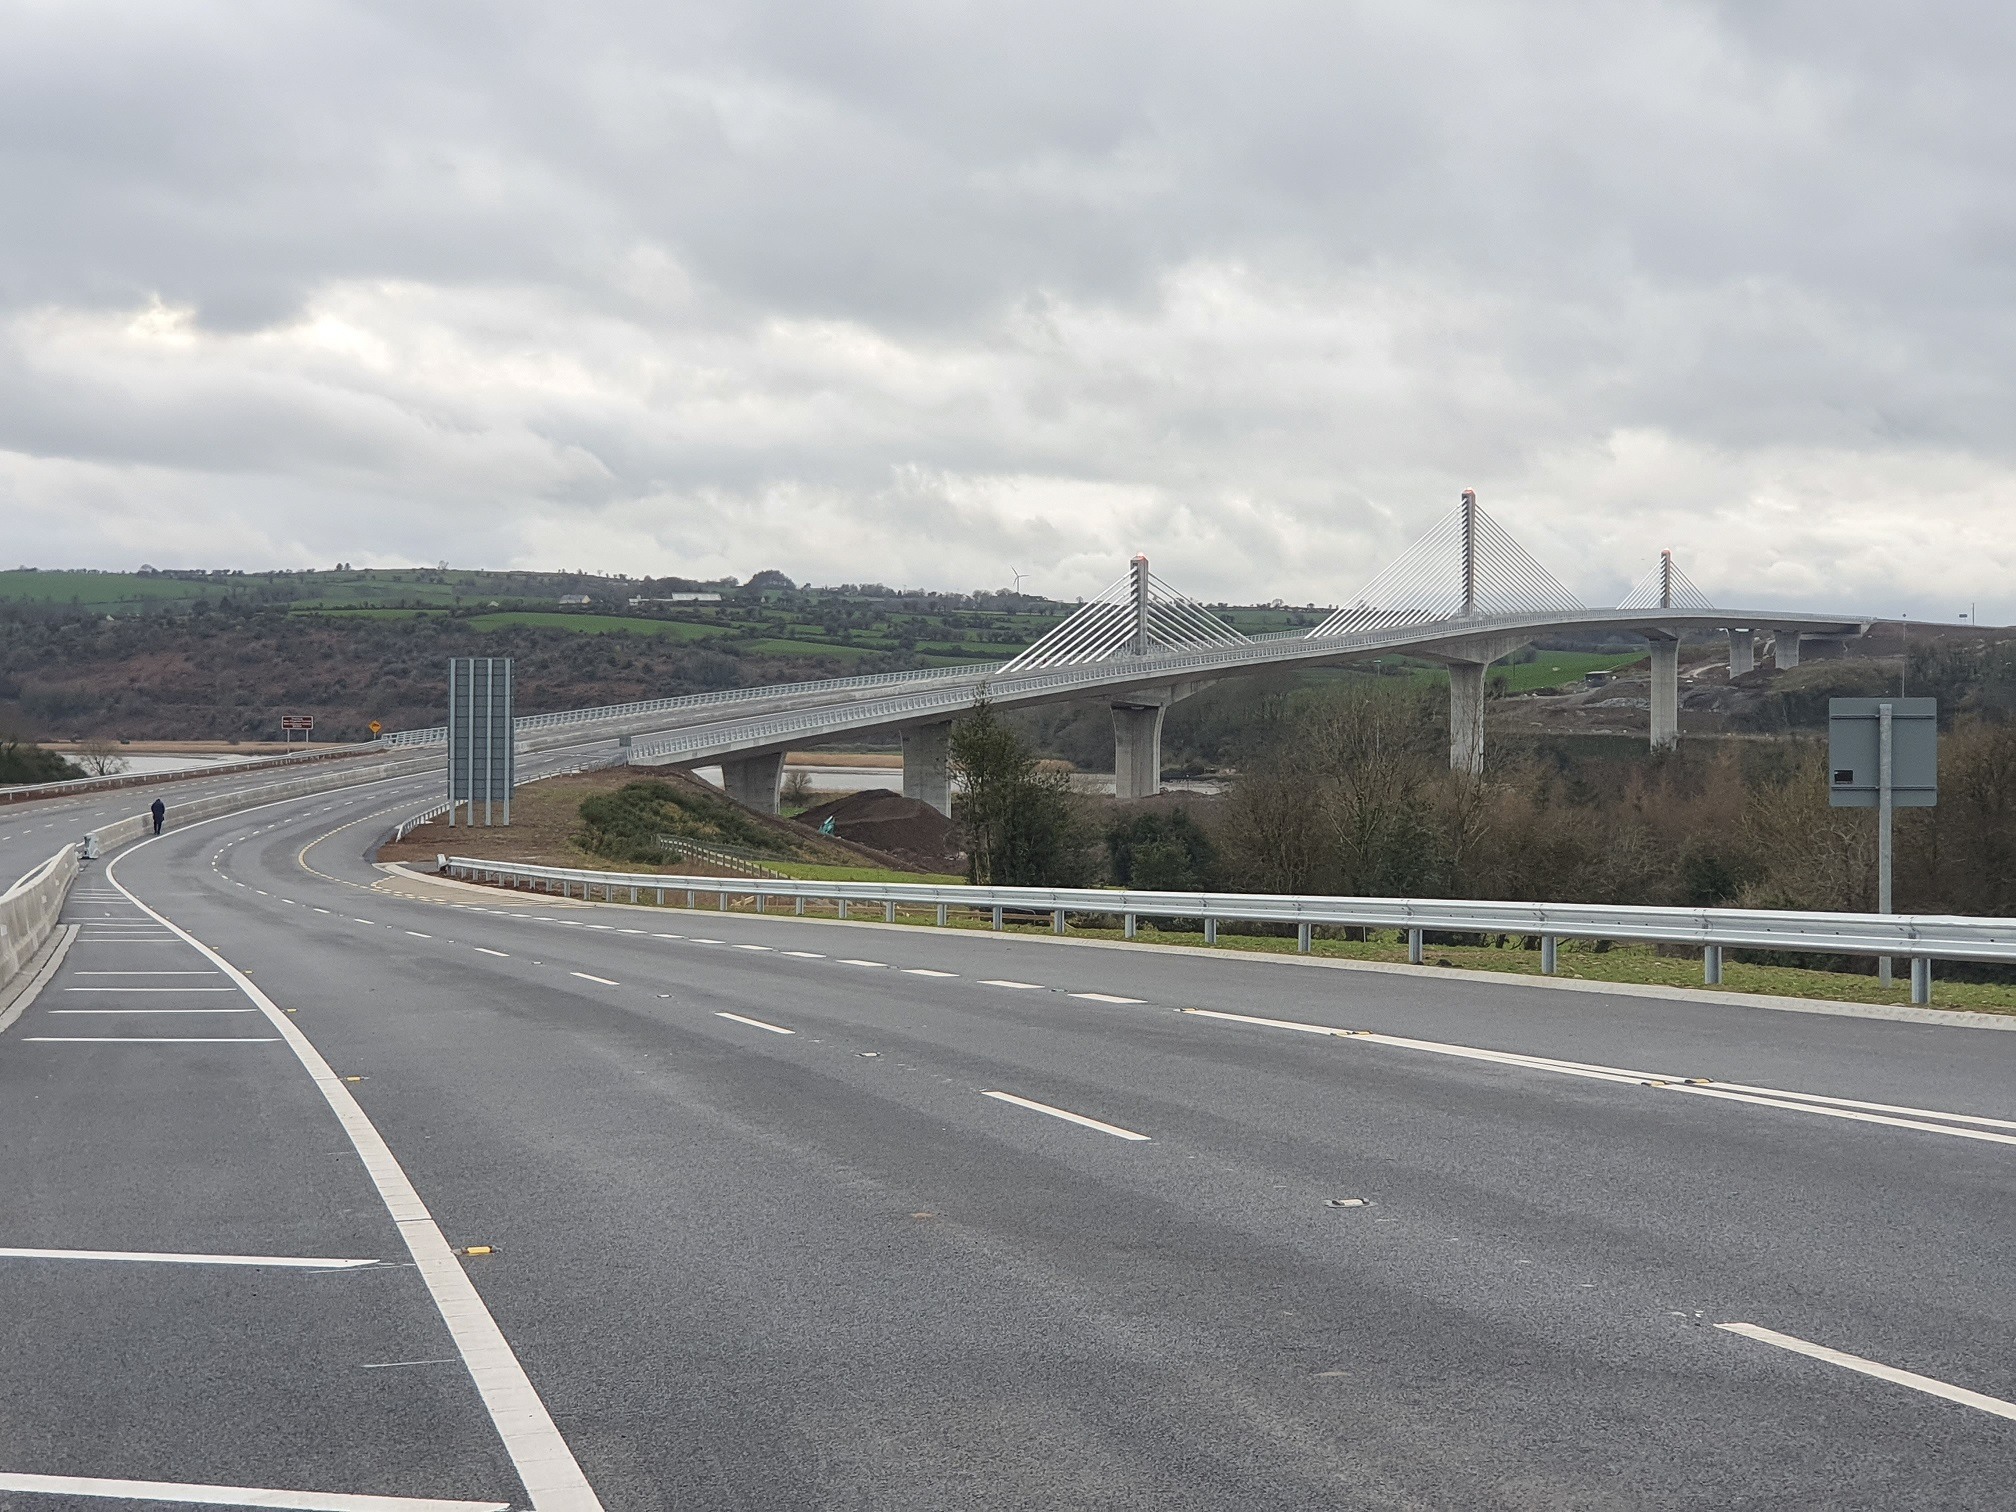 Photograph of the New Ross Bypass and new bridge.